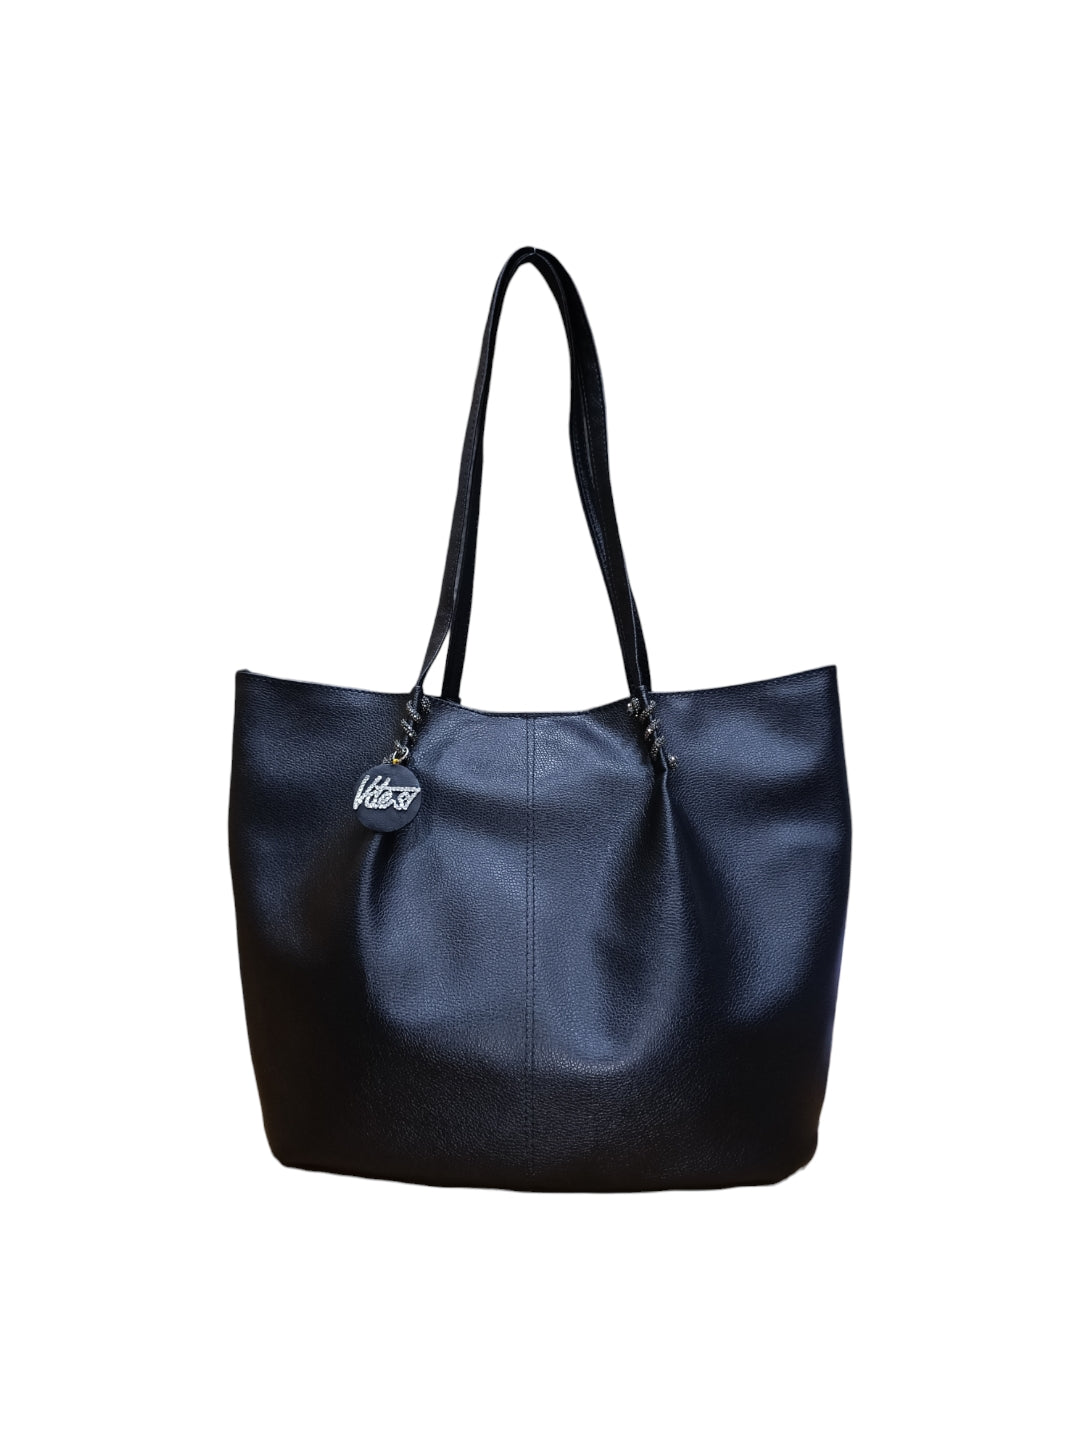 Perfect for work, travel, or leisure, our Tote Bag is the ultimate companion for every occasion.